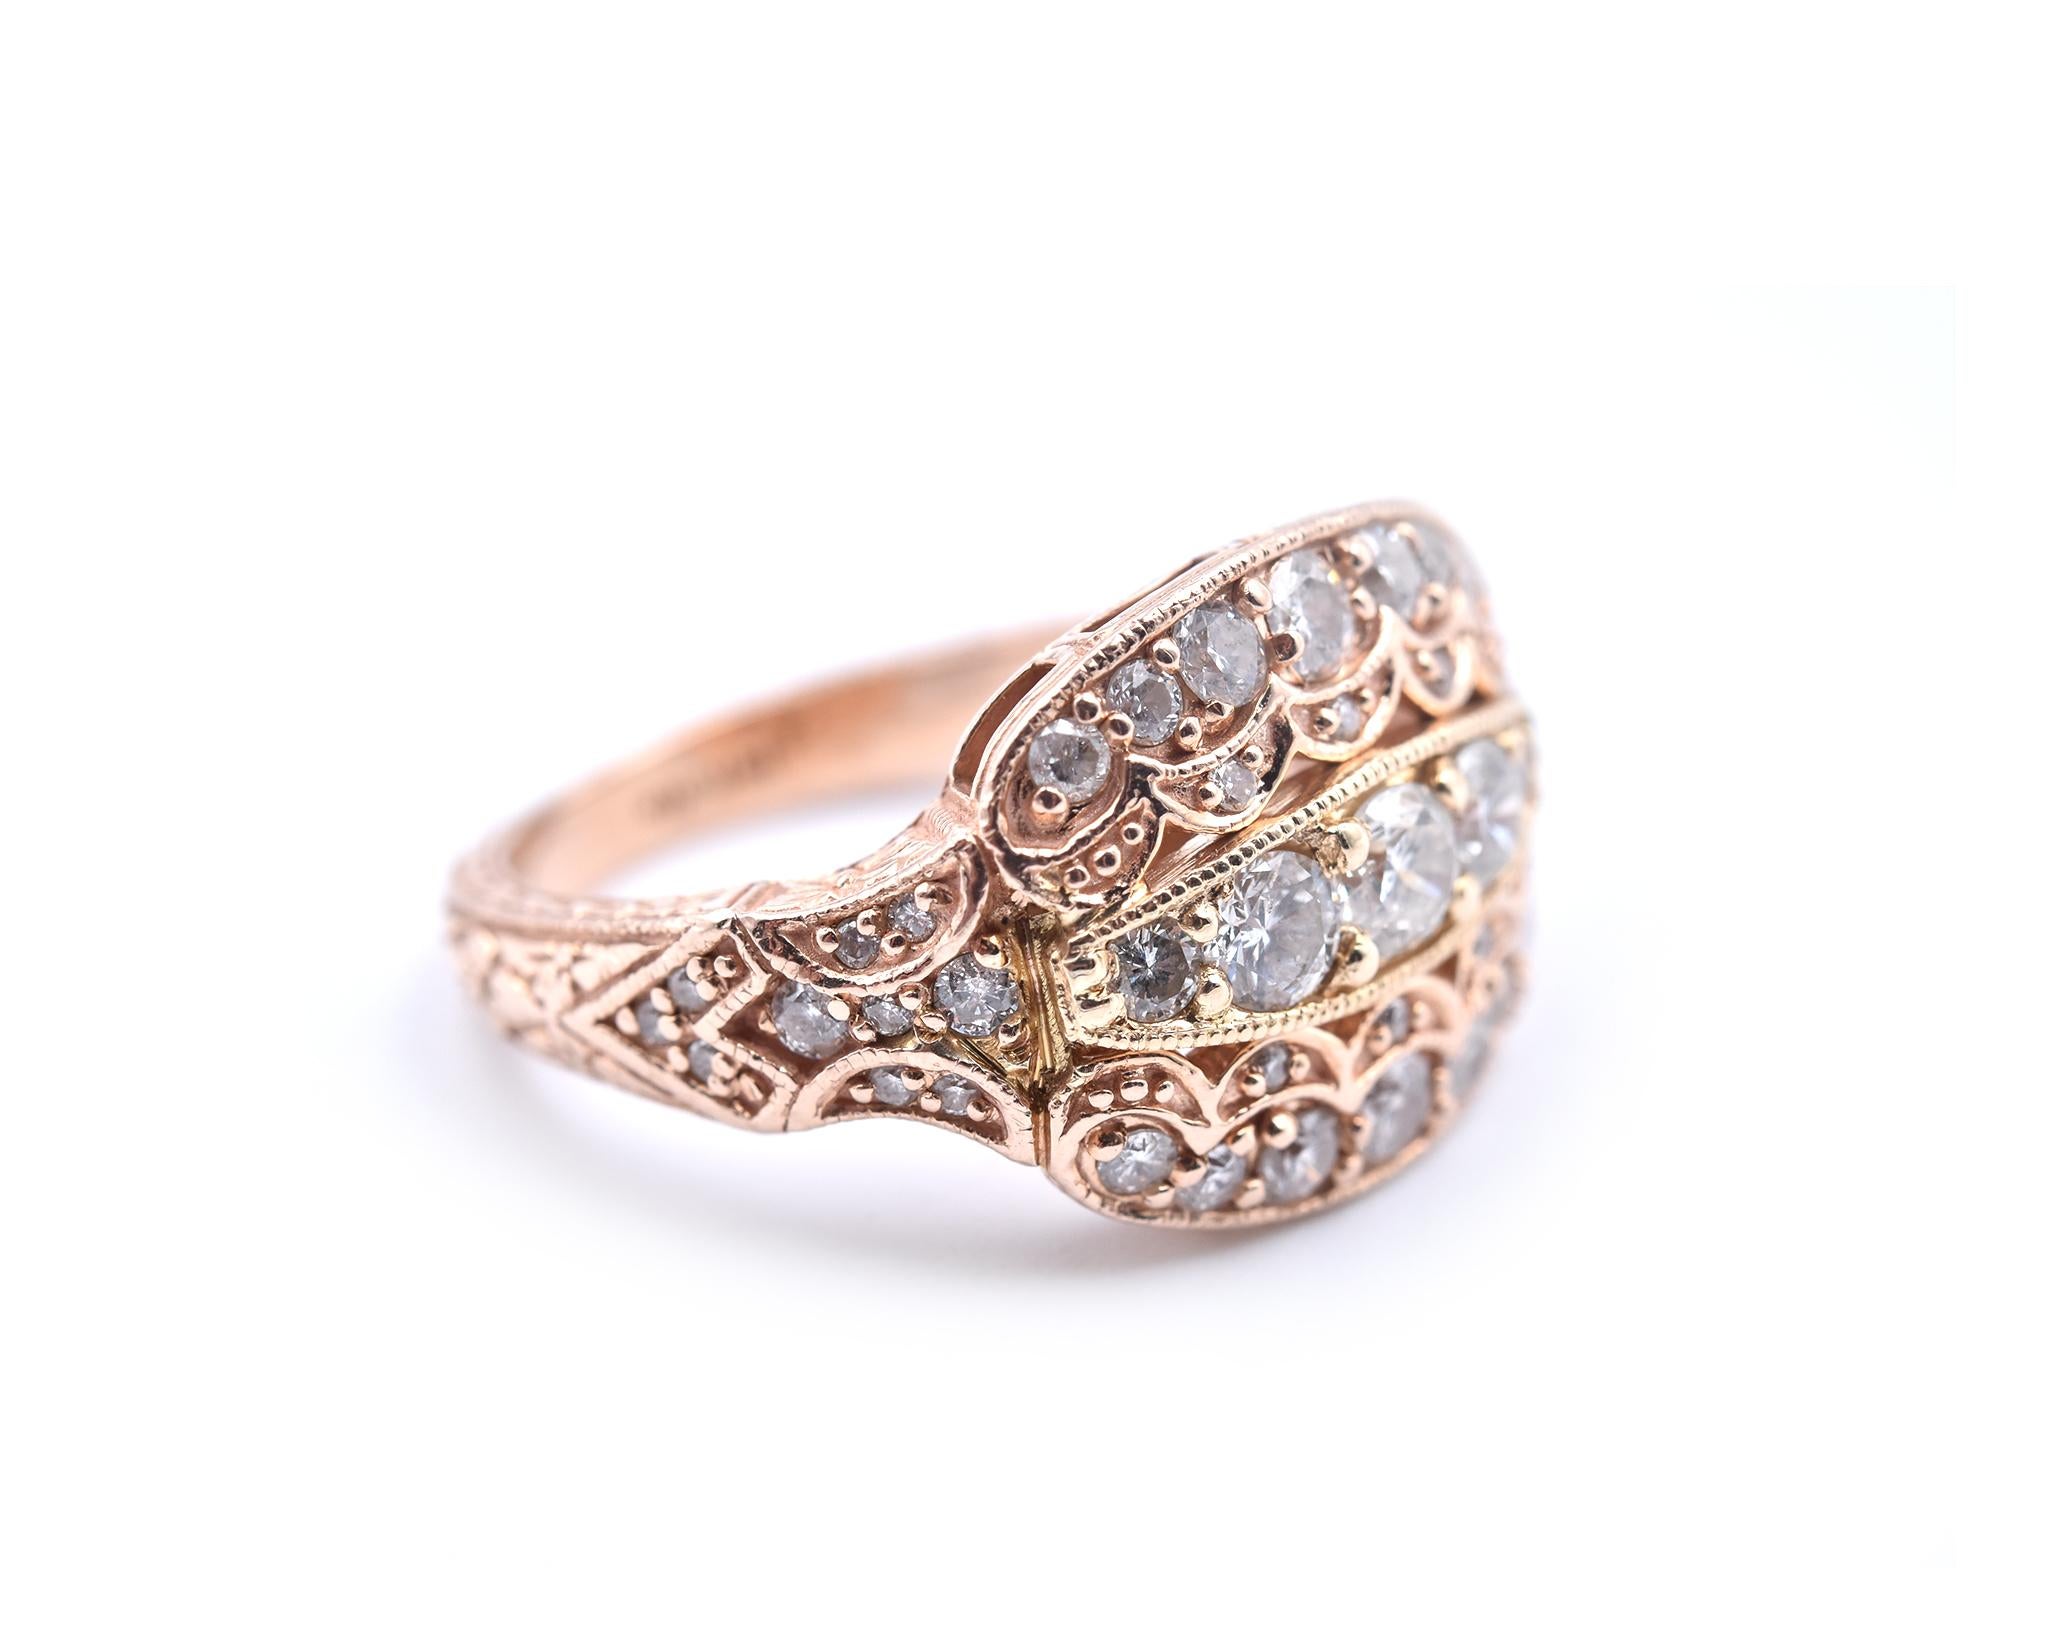 Designer: custom design
Material: 14k yellow and rose gold
Diamonds: 45 round brilliant cut= 1.33cttw
Color: G-H
Clarity: SI2
Ring Size: 6 ¼ (please allow two additional shipping days for sizing requests)
Dimensions: ring top is approximately